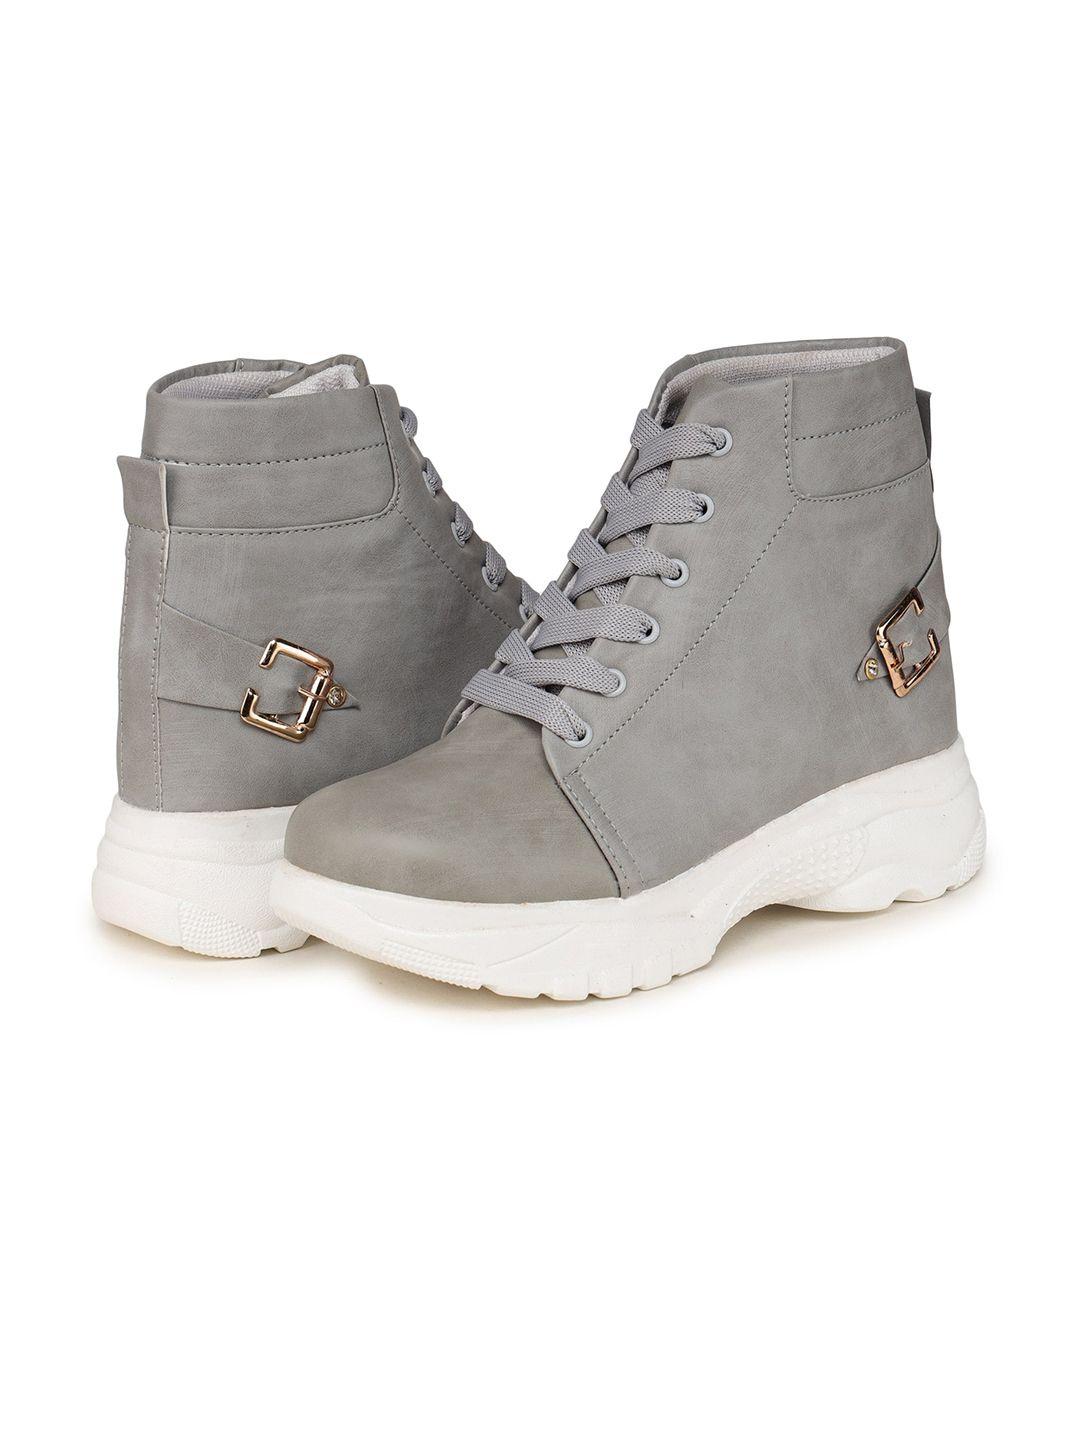 bootco women grey solid high-top flat boots